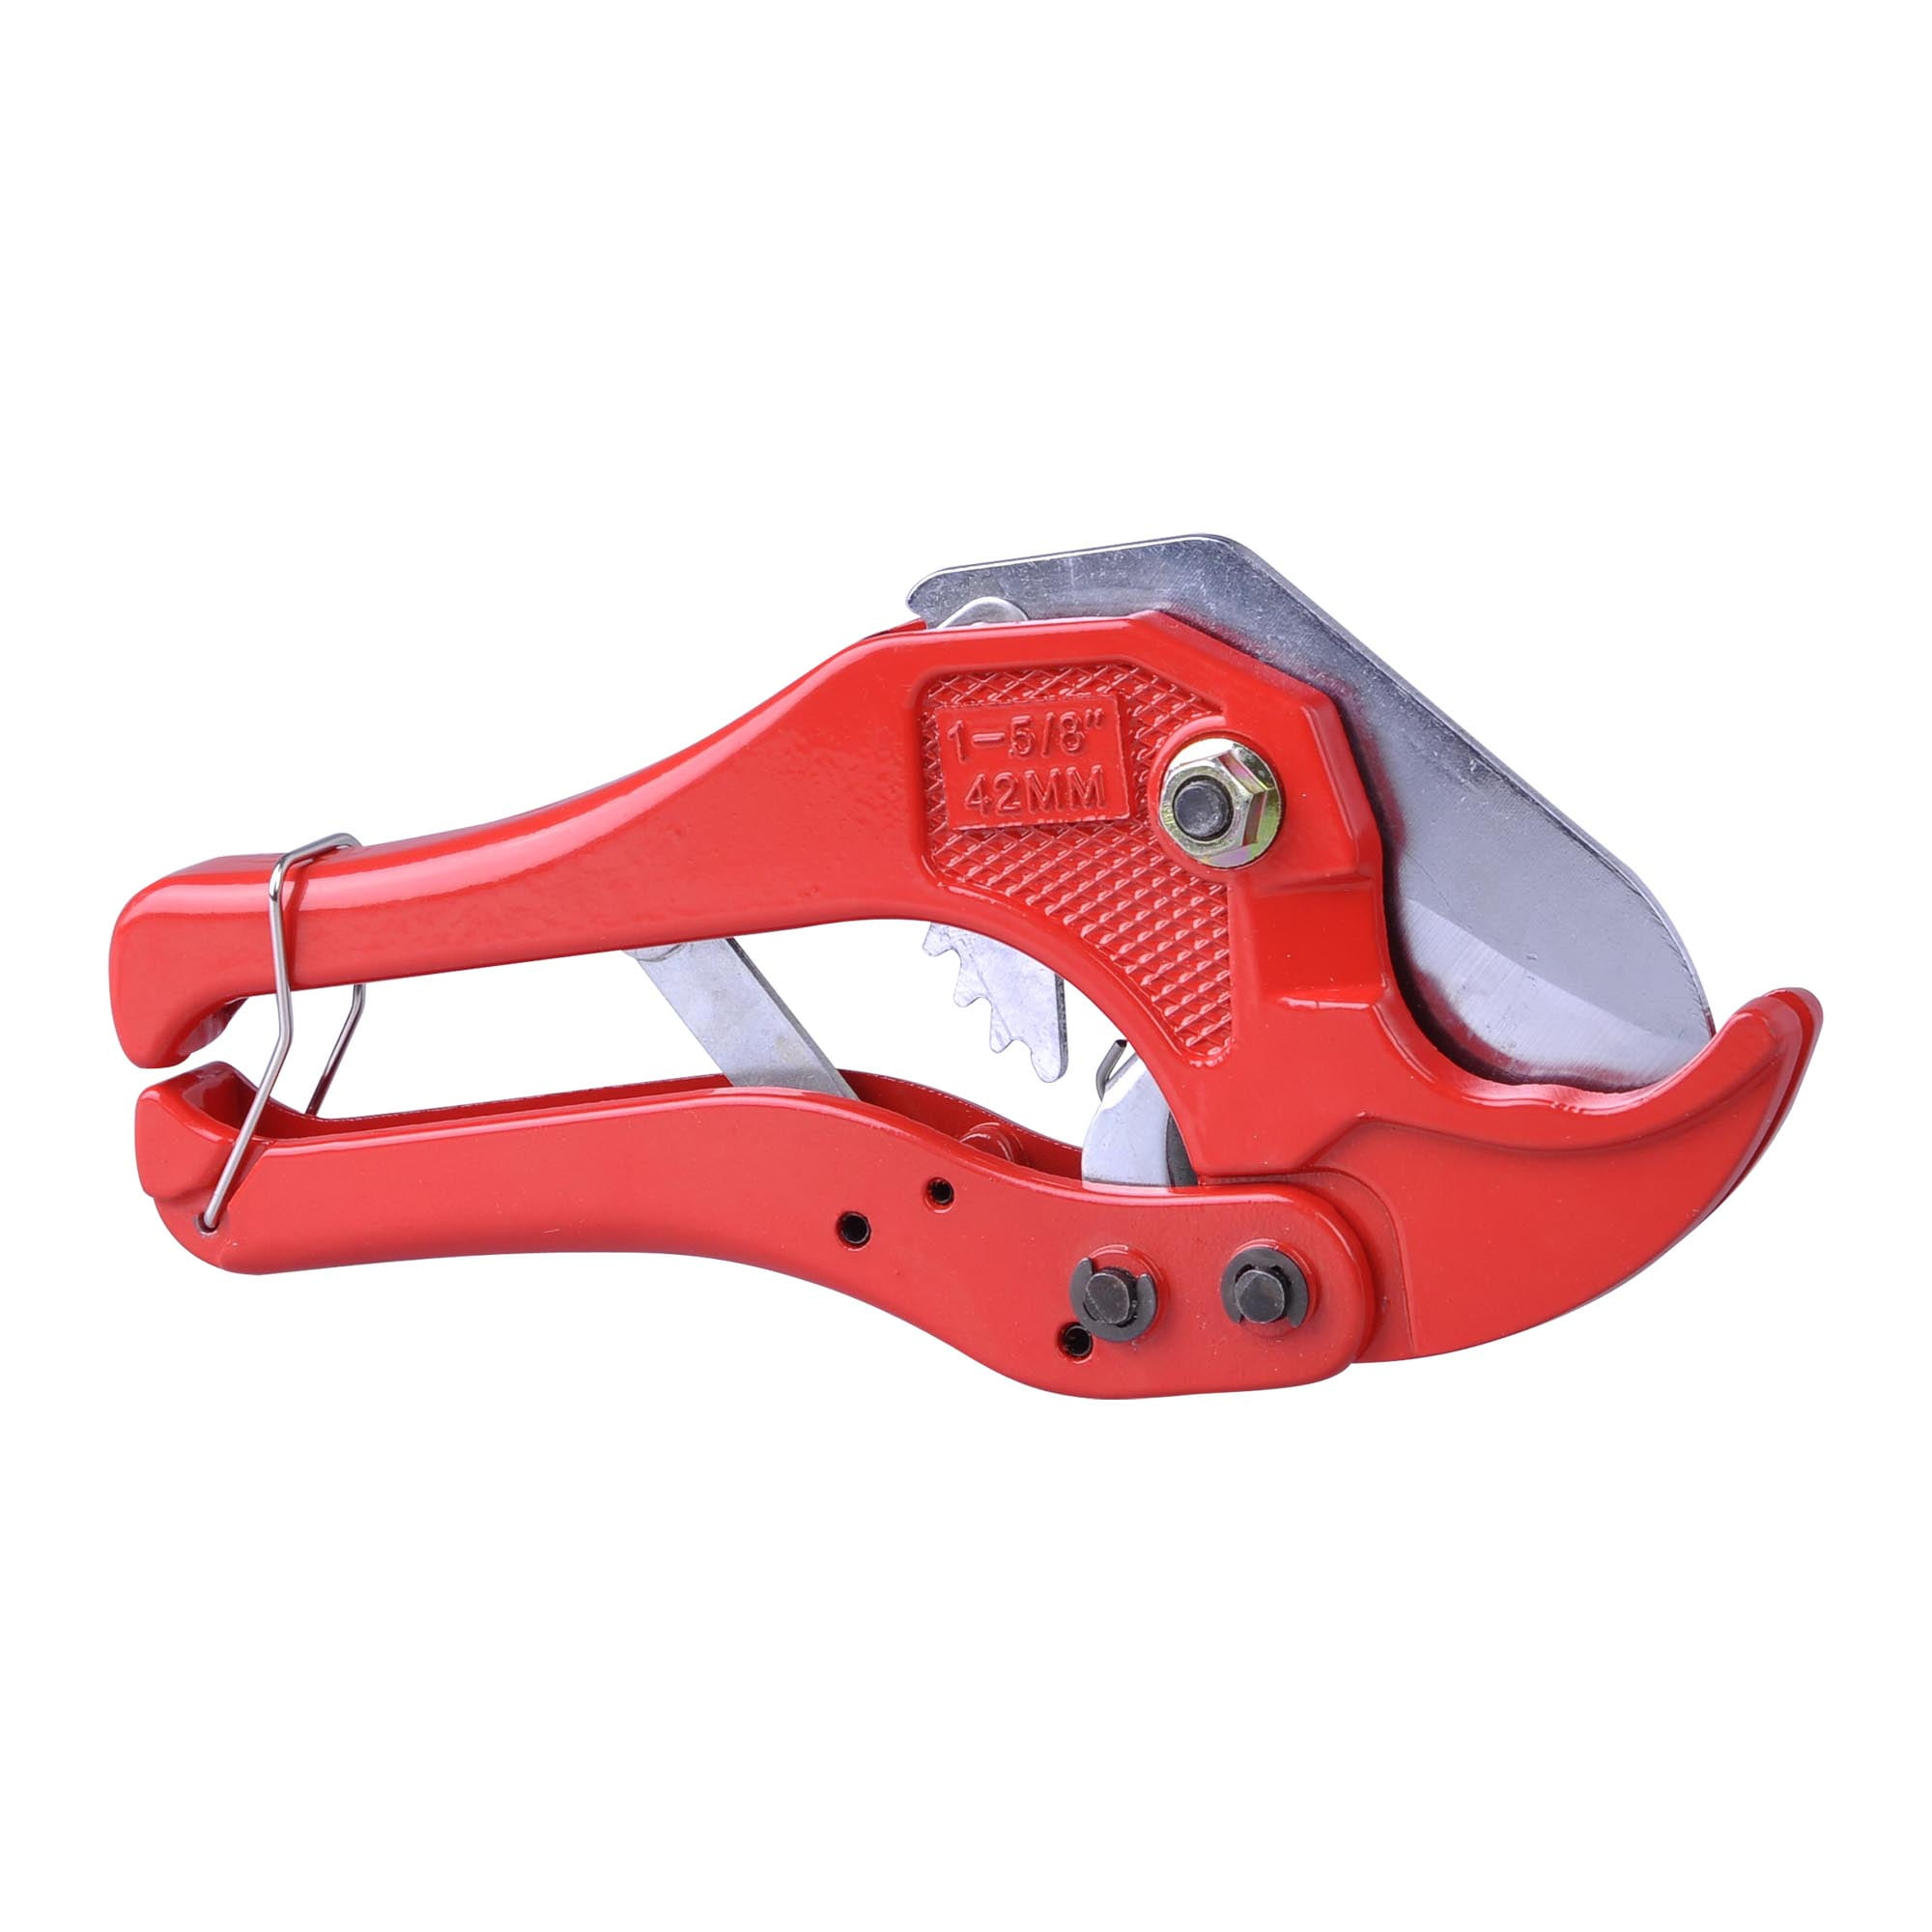 2 PCS PEX/CPVC Pipe/Tubing Cutter for Pipe sizes up to 1" 